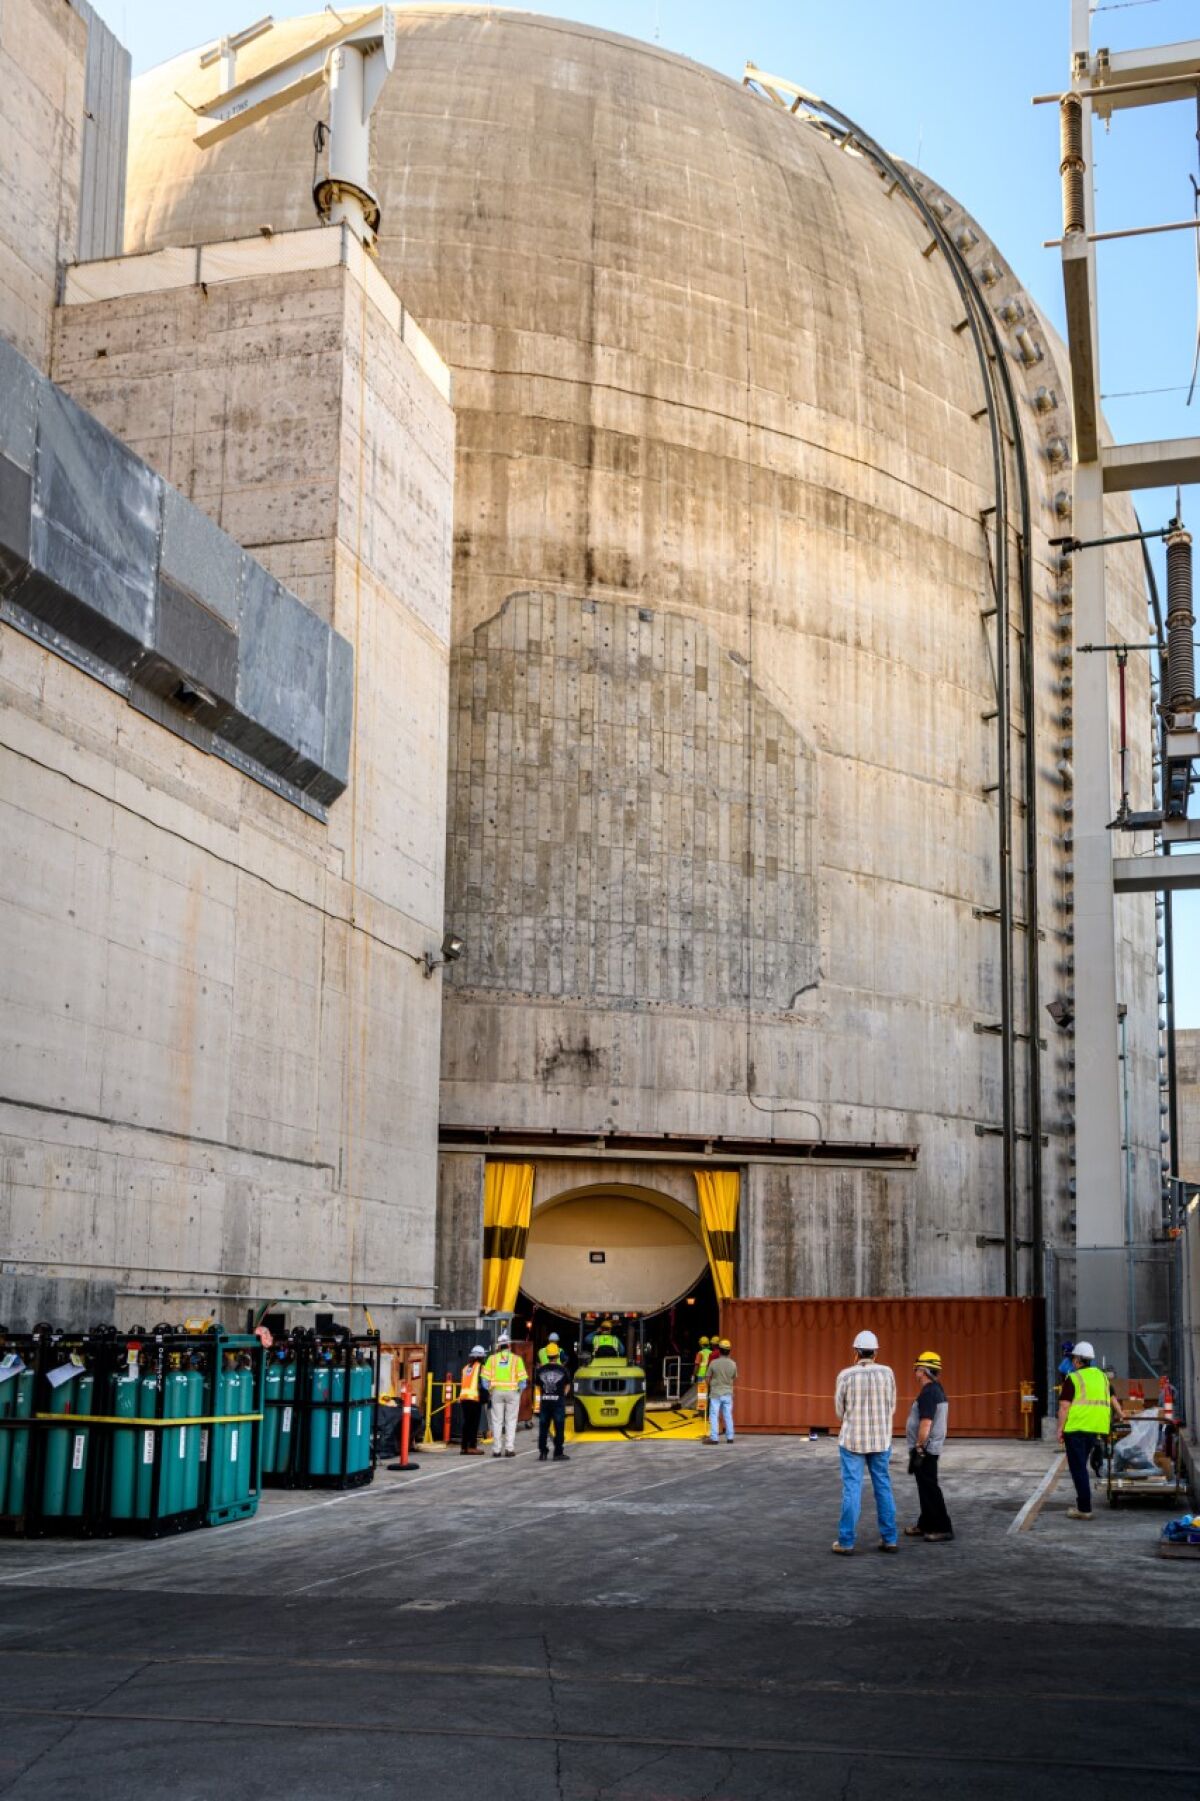 Workers and equipment in an open hatchway at the base of a nuclear plant containment dome